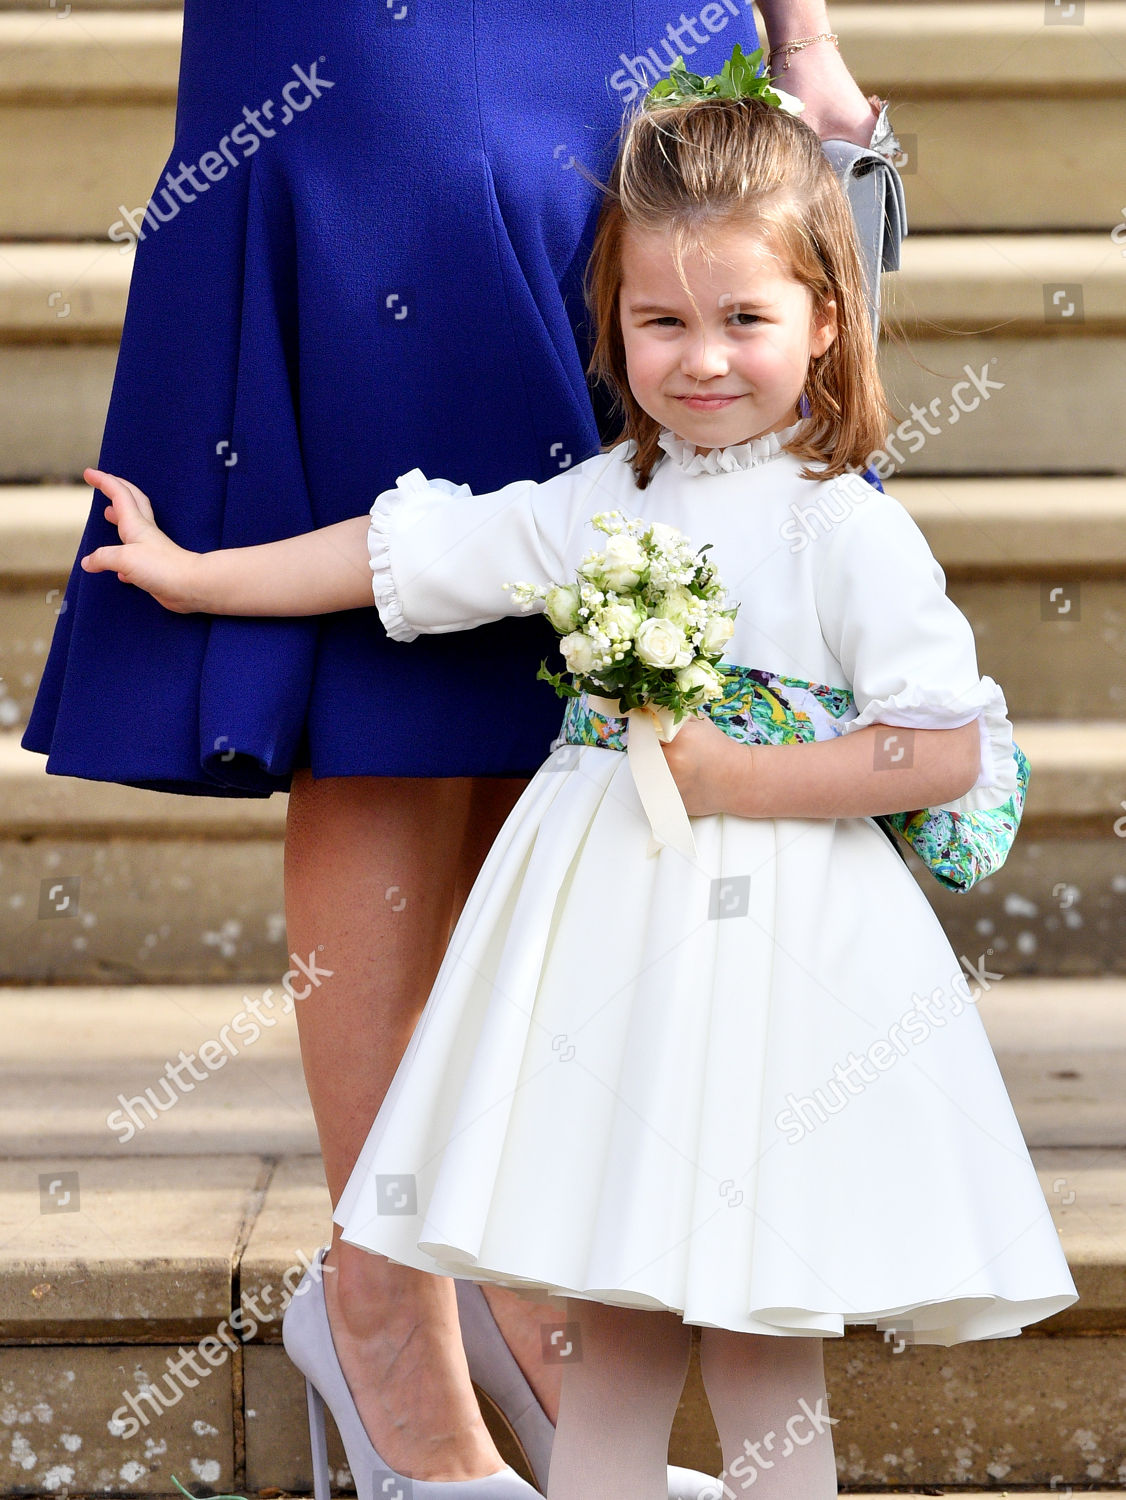 the-wedding-of-princess-eugenie-and-jack-brooksbank-carriage-procession-windsor-berkshire-uk-shutterstock-editorial-9927759bc.jpg